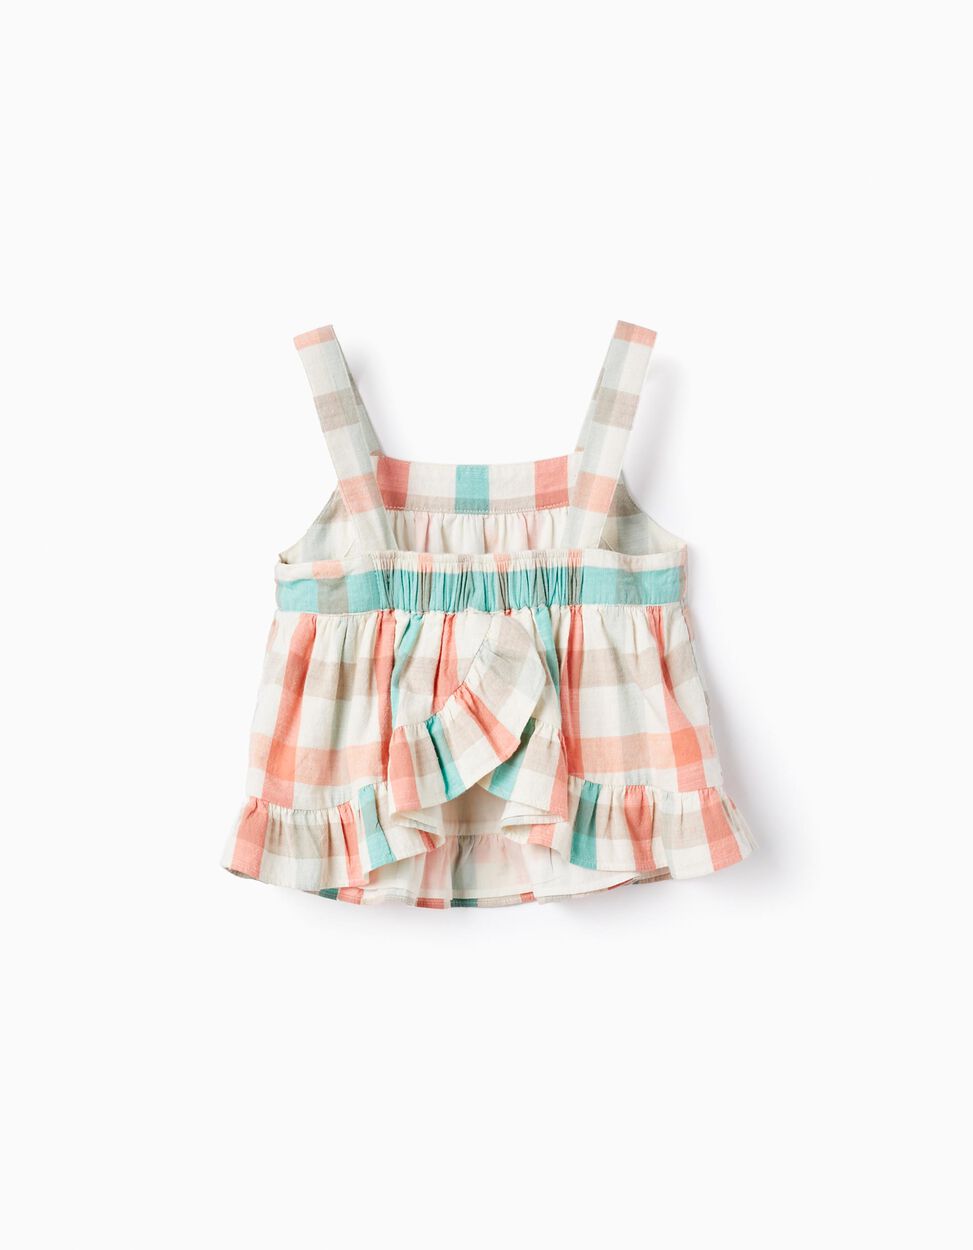 Buy Online Square Cotton Crop Top for Girls 'B&S', Aqua Green/Coral